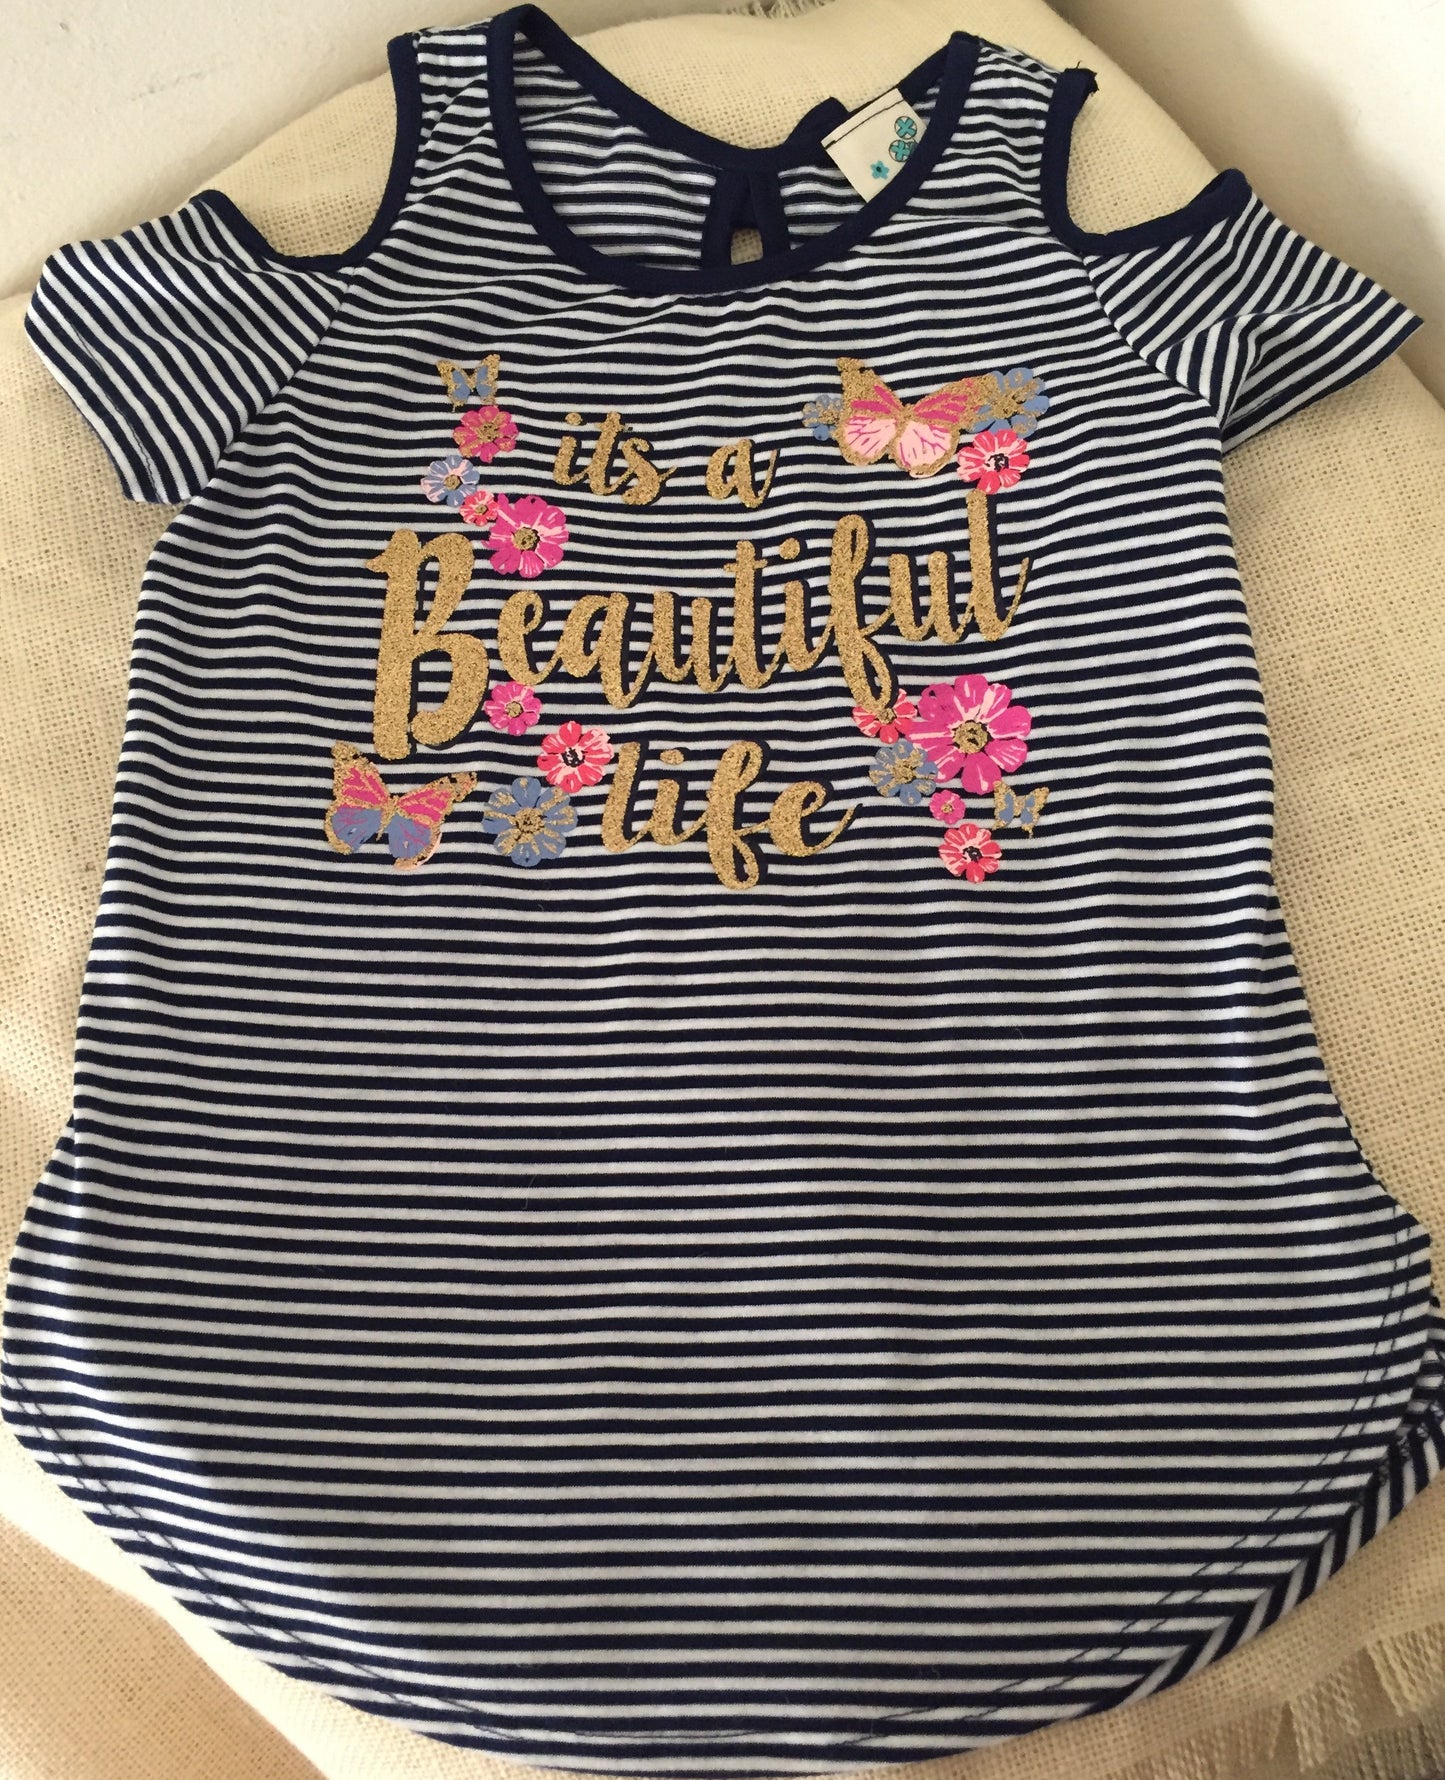 Girls Striped Cold Shoulder "It’s a Beautiful Life" Shirt